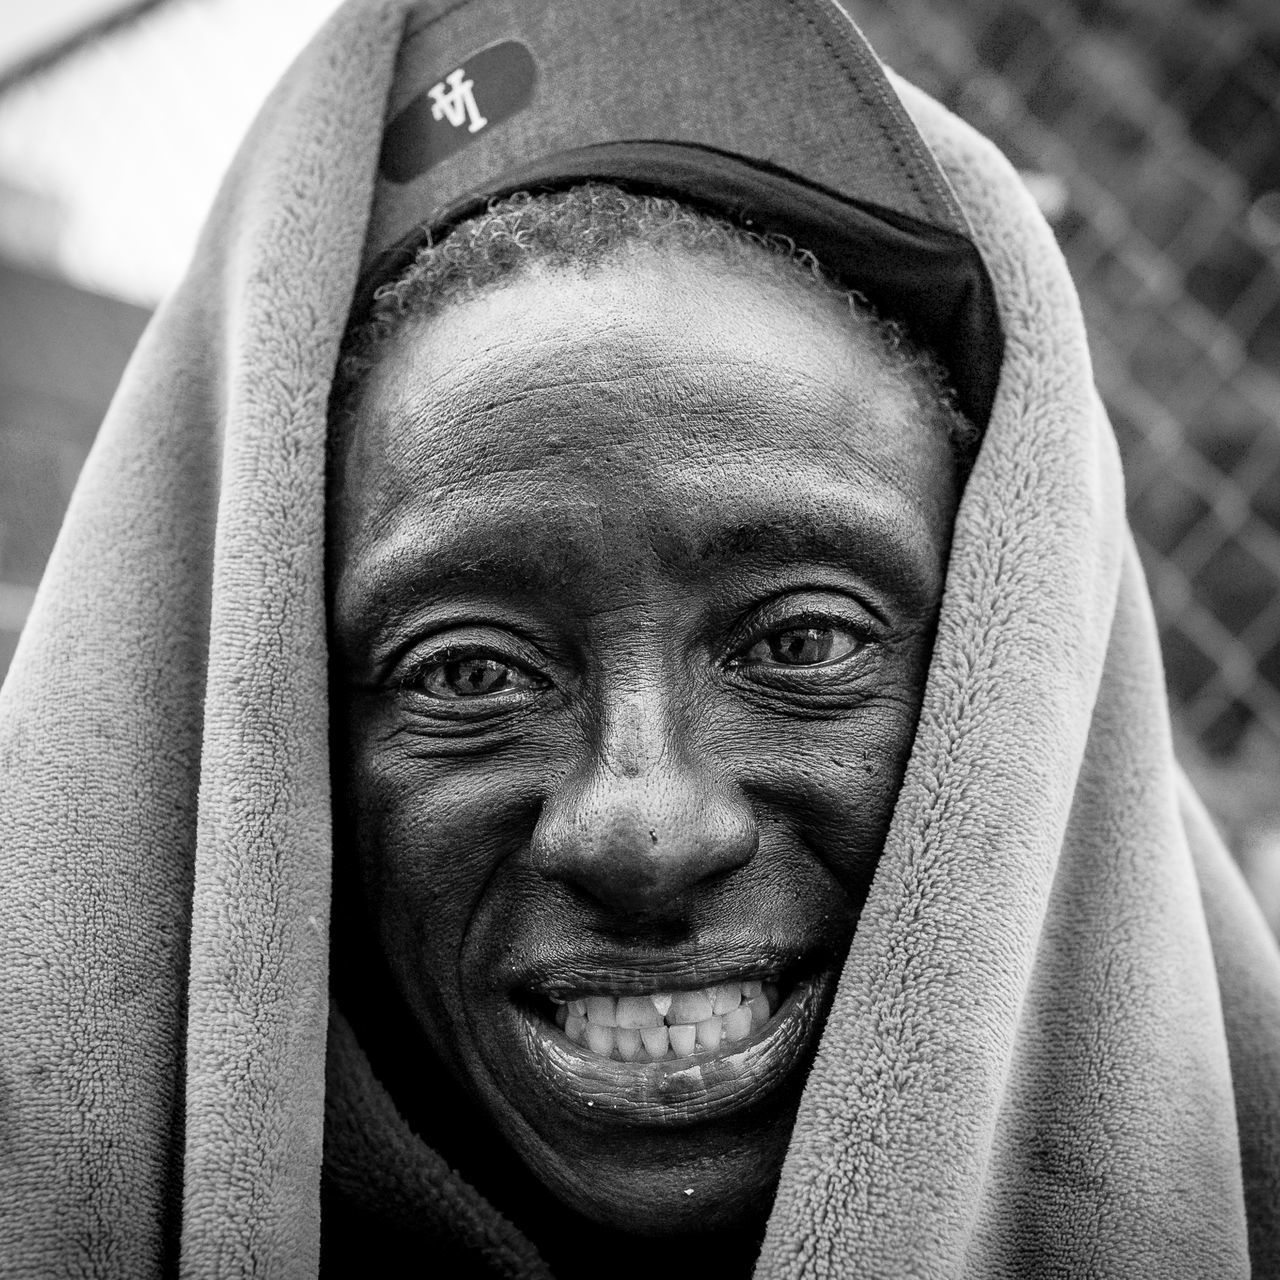 portrait, one person, real people, headshot, looking at camera, close-up, men, hood, front view, human face, adult, lifestyles, hooded shirt, hood - clothing, human body part, body part, clothing, mid adult, leisure activity, mature men